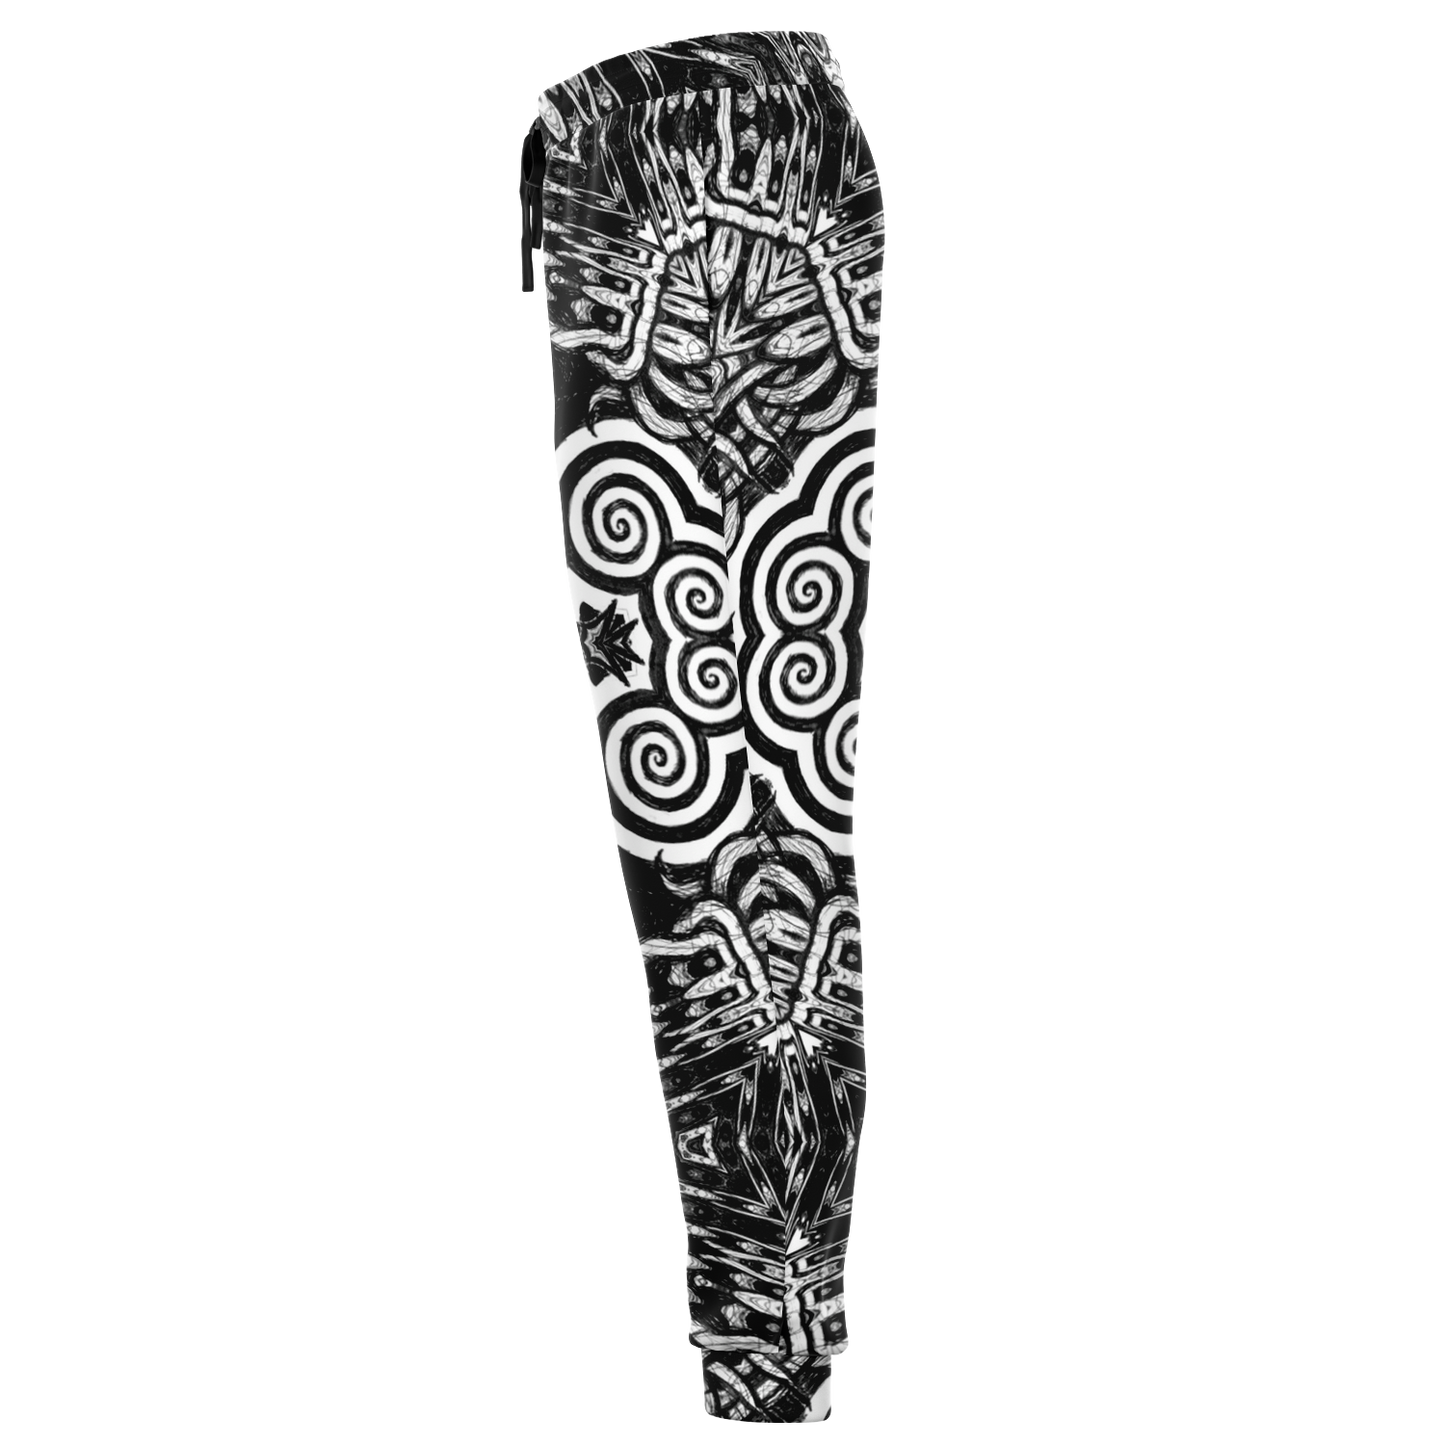 Madness in Black and White Joggers